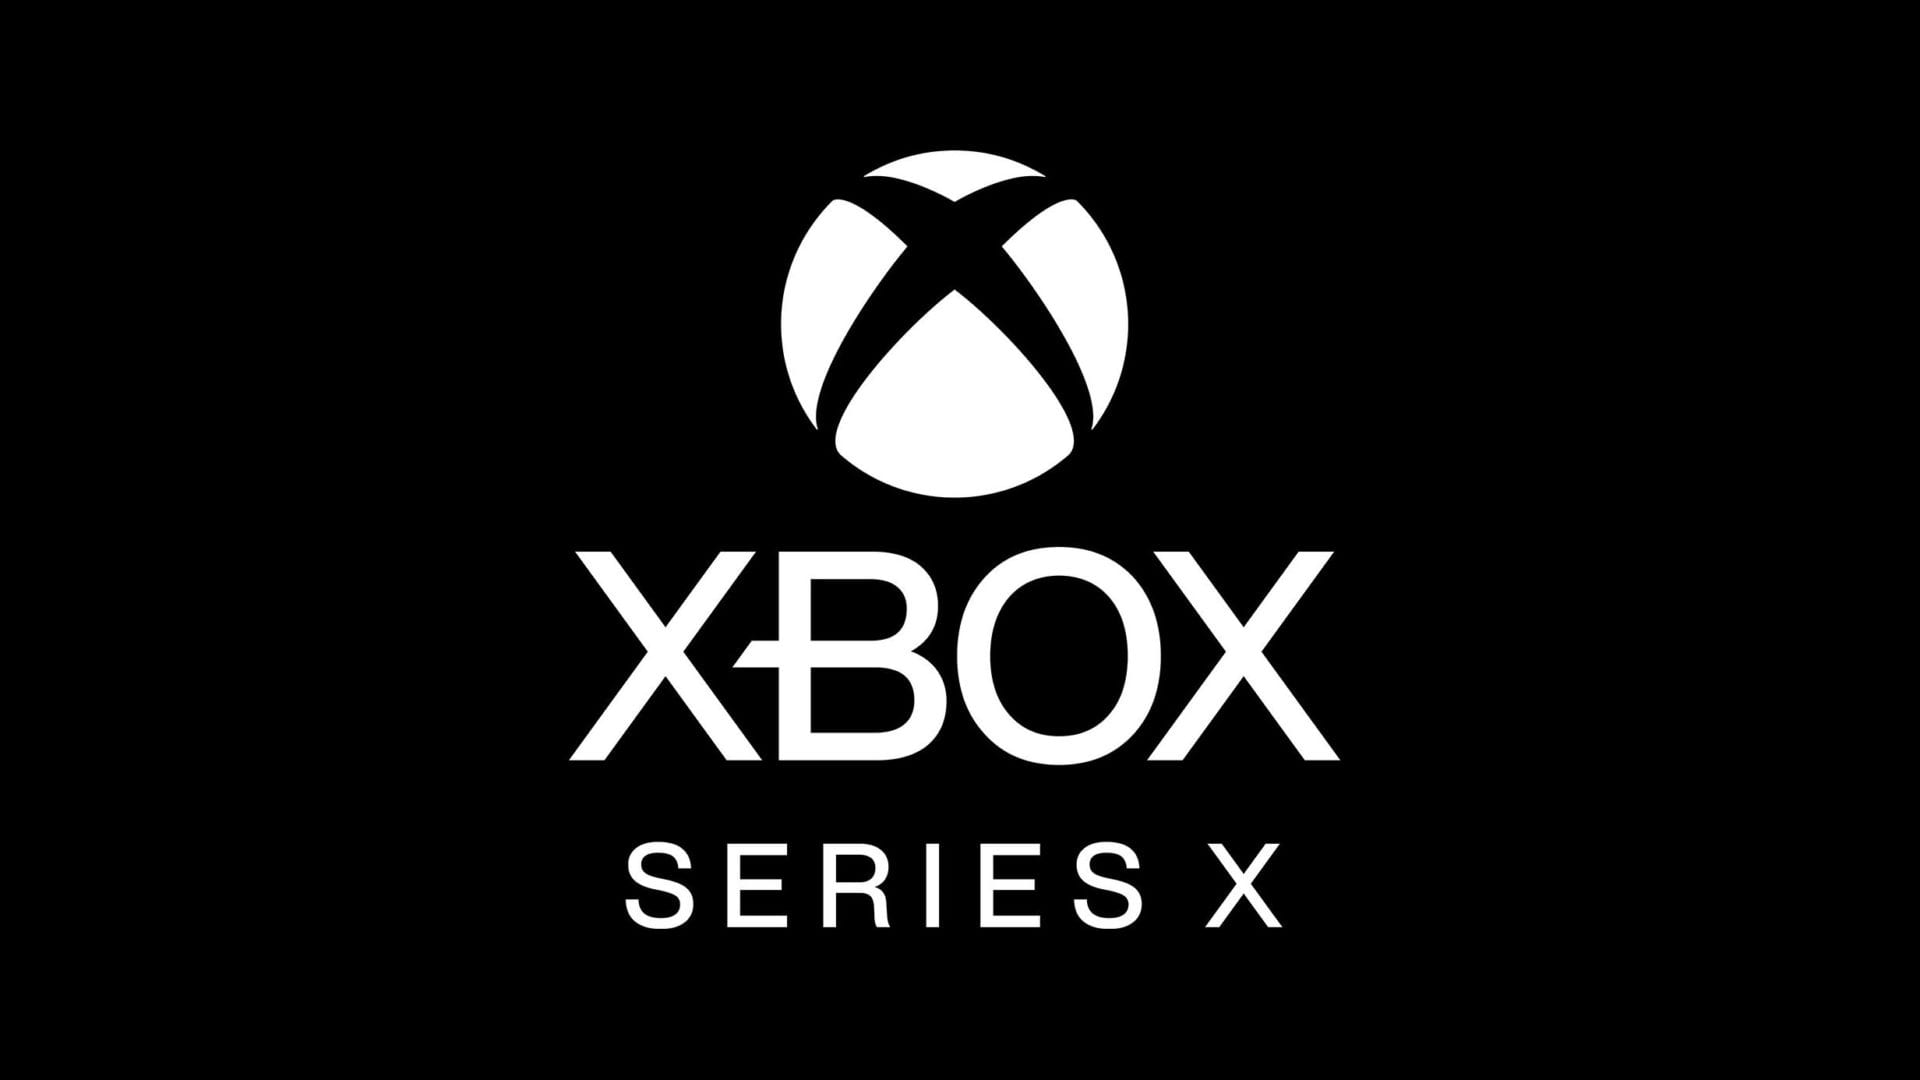 Xbox Series X Info Blowout Is All About Specs, Image, Features, and First Look at Demo Gameplay